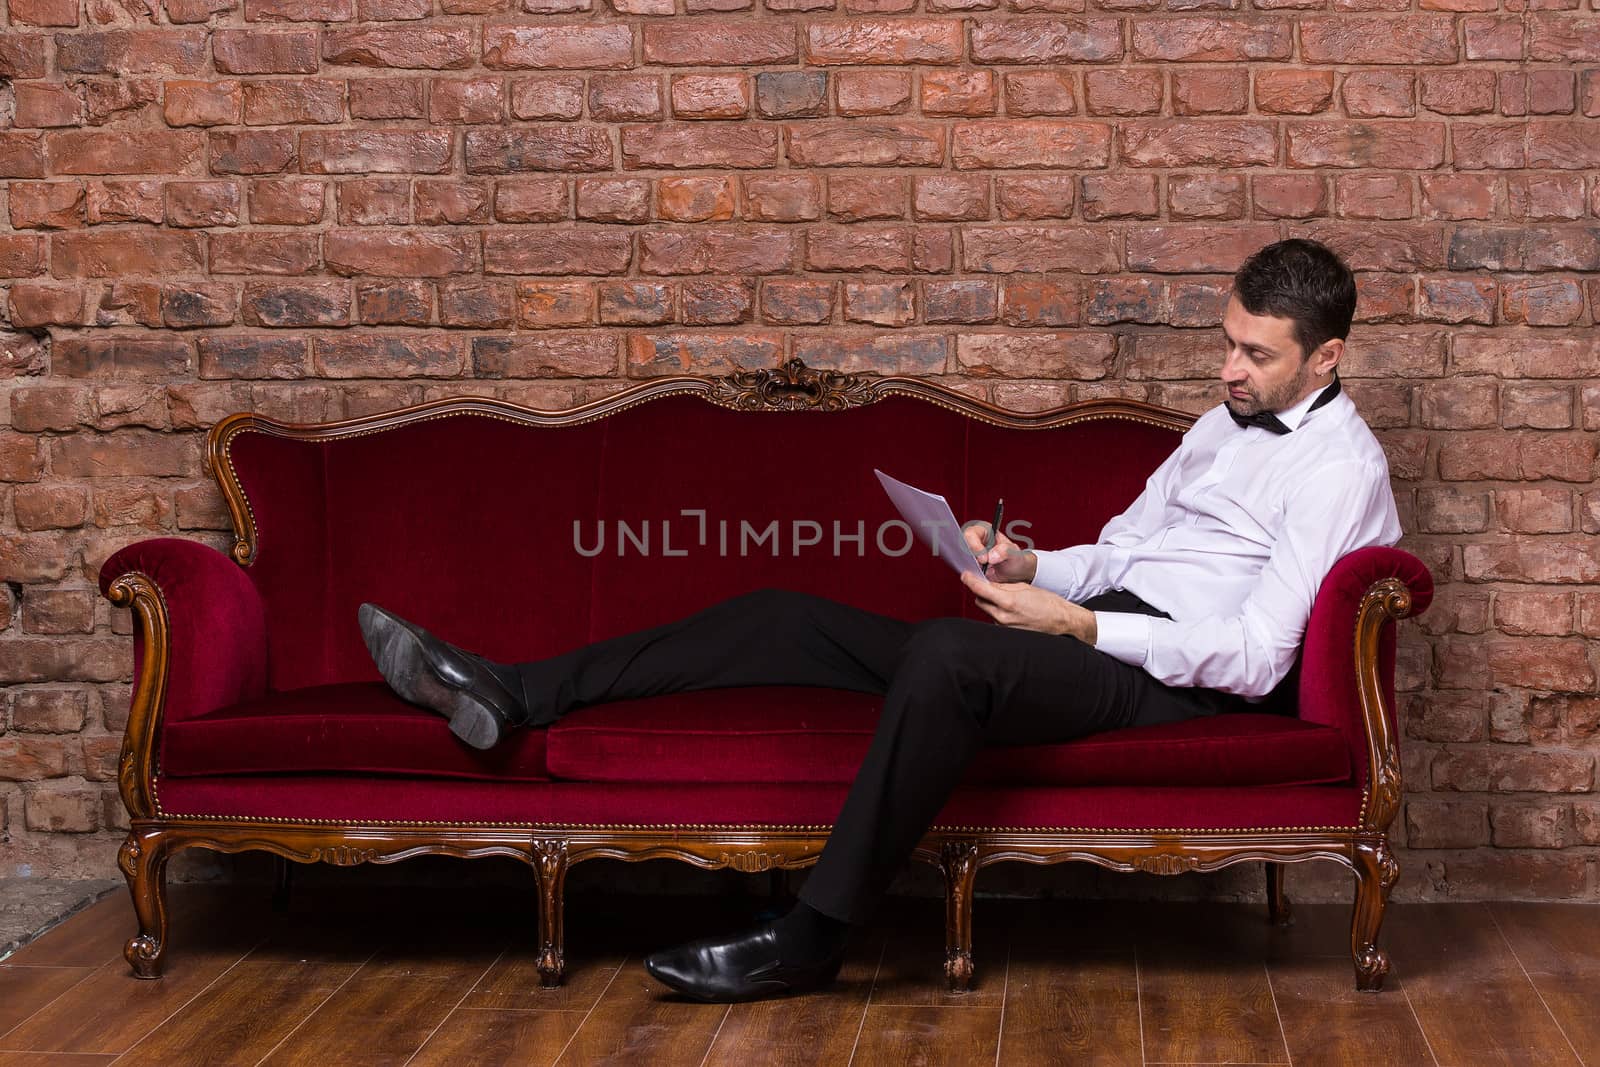 Conceptual image of an elegant businessman lying relaxing on a settee against a brick wall and reading paperwork